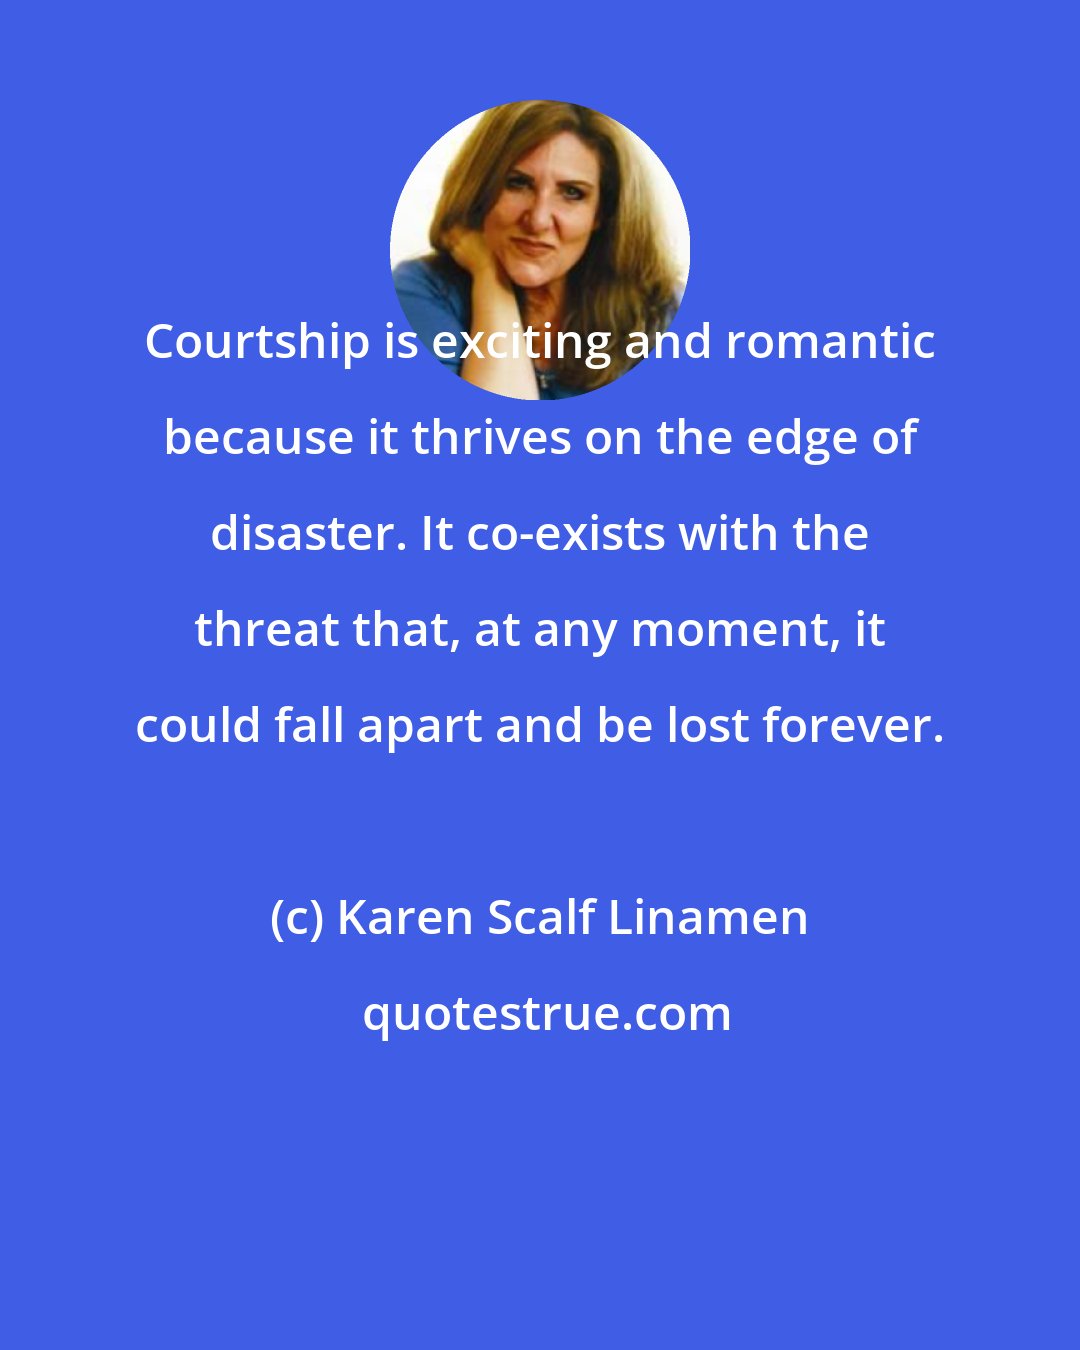 Karen Scalf Linamen: Courtship is exciting and romantic because it thrives on the edge of disaster. It co-exists with the threat that, at any moment, it could fall apart and be lost forever.